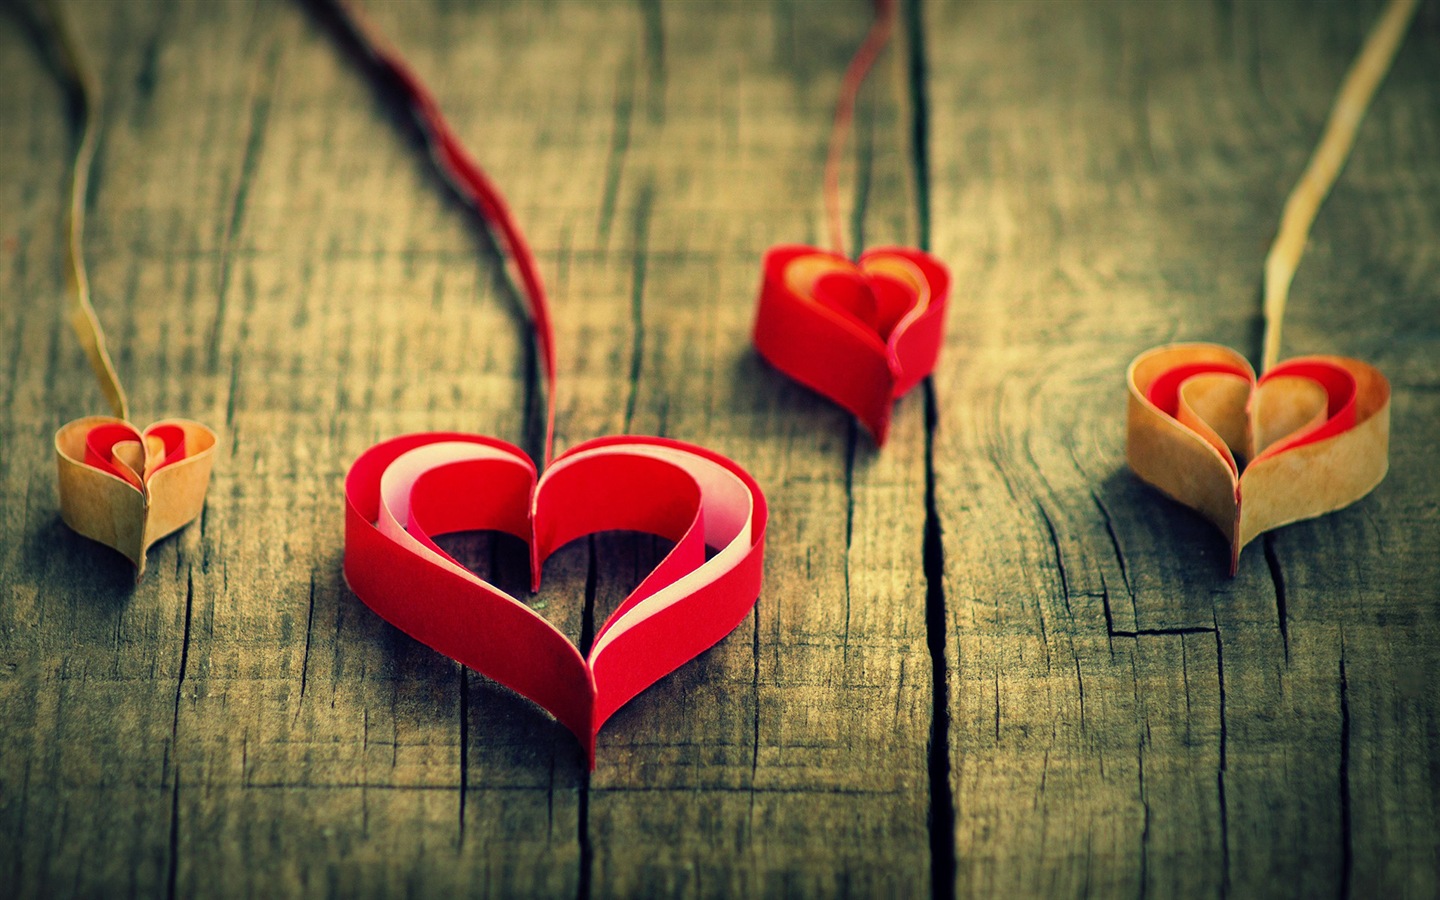 The theme of love, creative heart-shaped HD wallpapers #3 - 1440x900